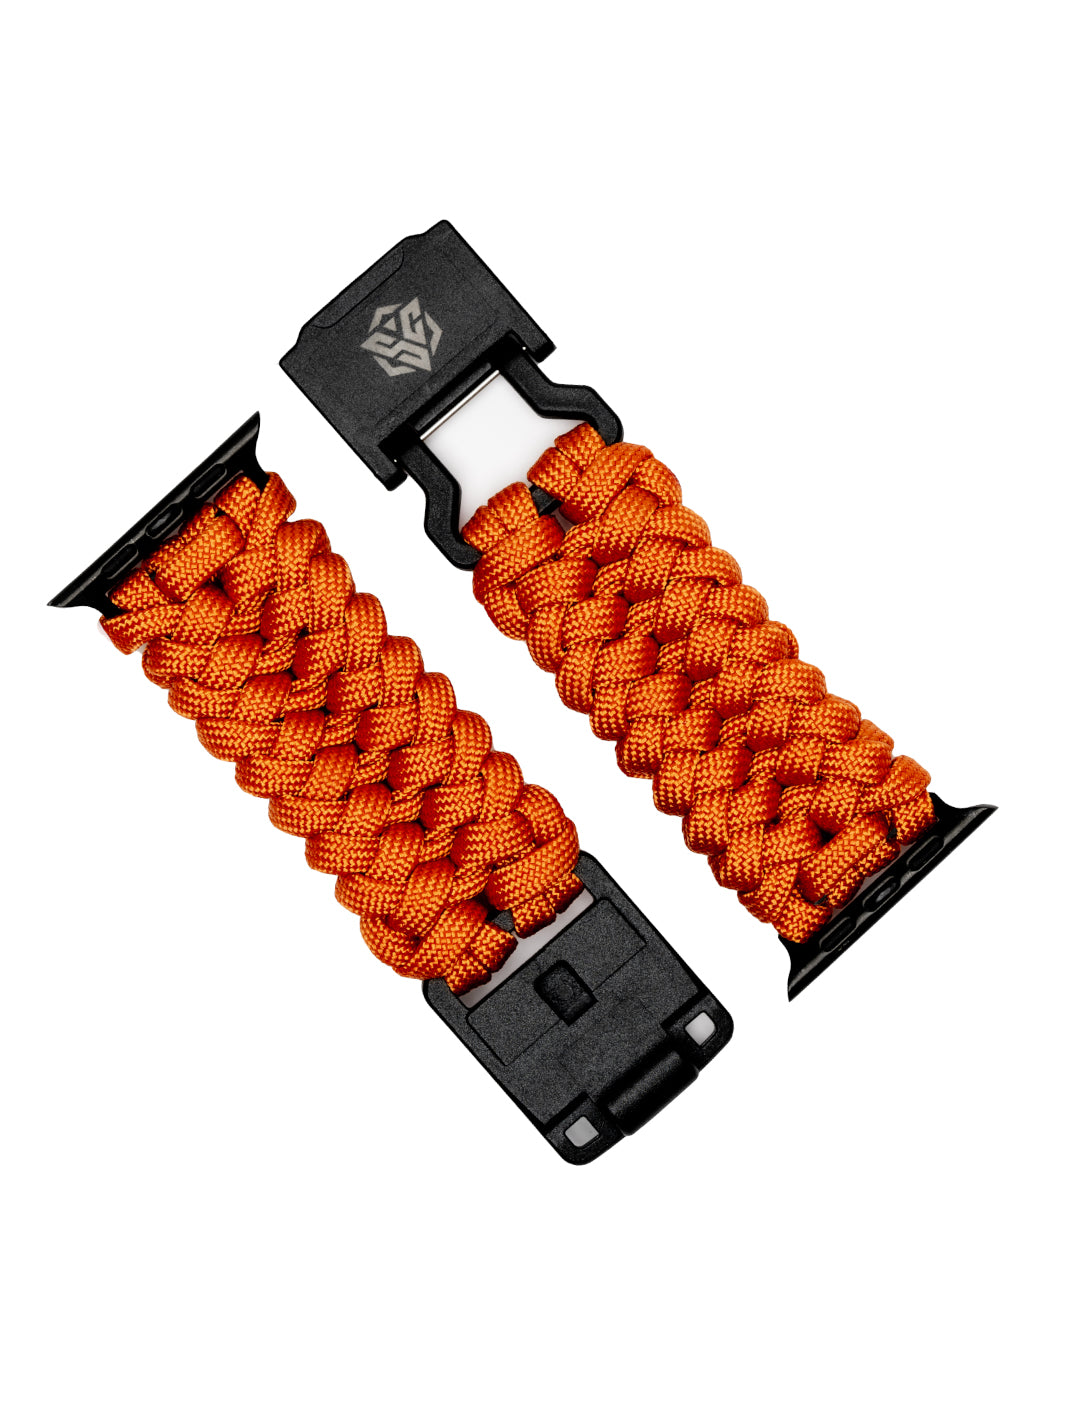 Strapcord Handcrafted Apple Watch Band - Burnt Orange- Paracord Apple Watch 1/2/3 (38mm)